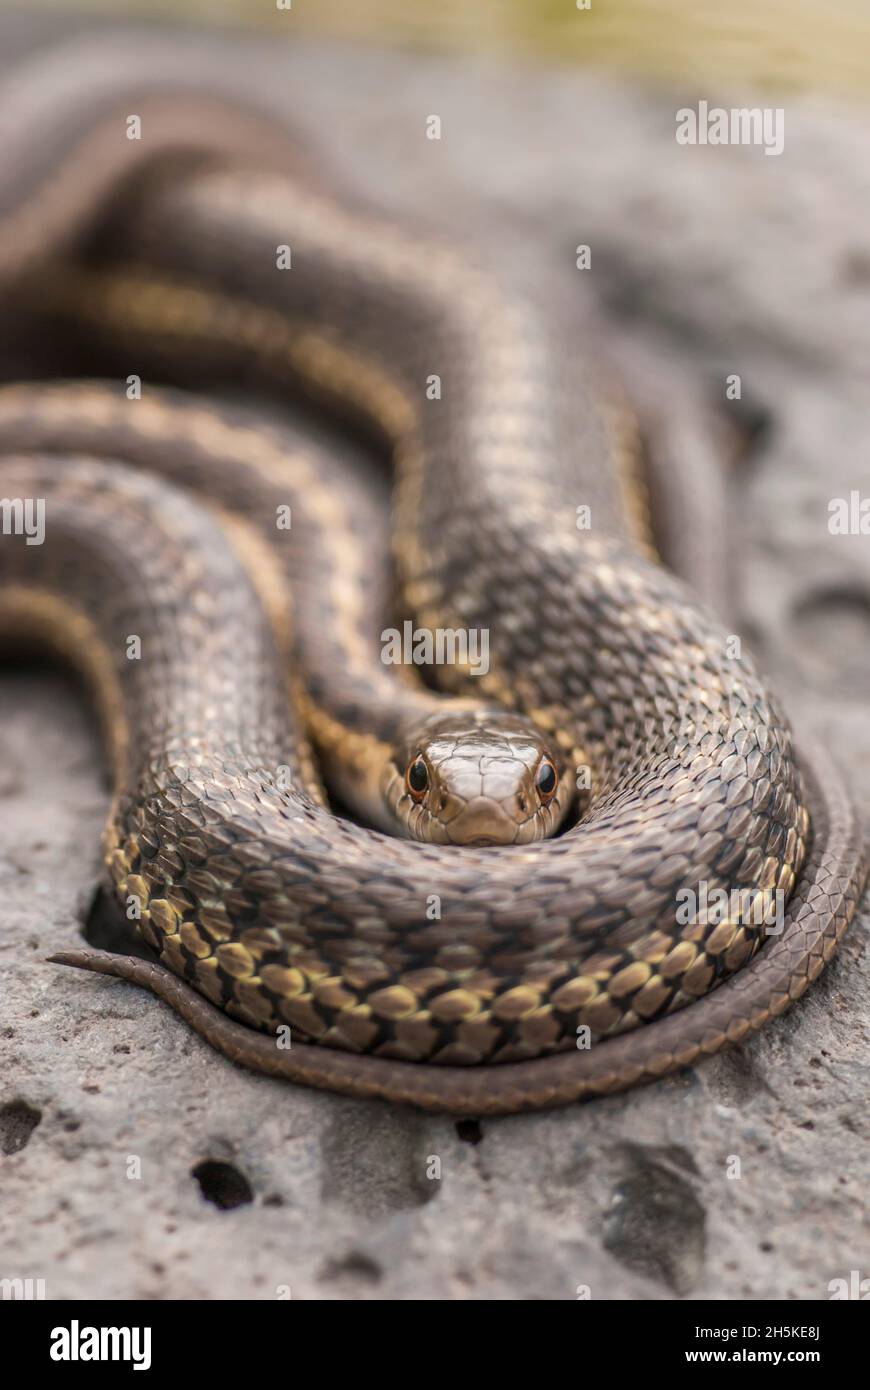 Close-up portrait of a wandering garter snake (Thamnophis elegans); Yellowstone National Park, United States of America Stock Photo